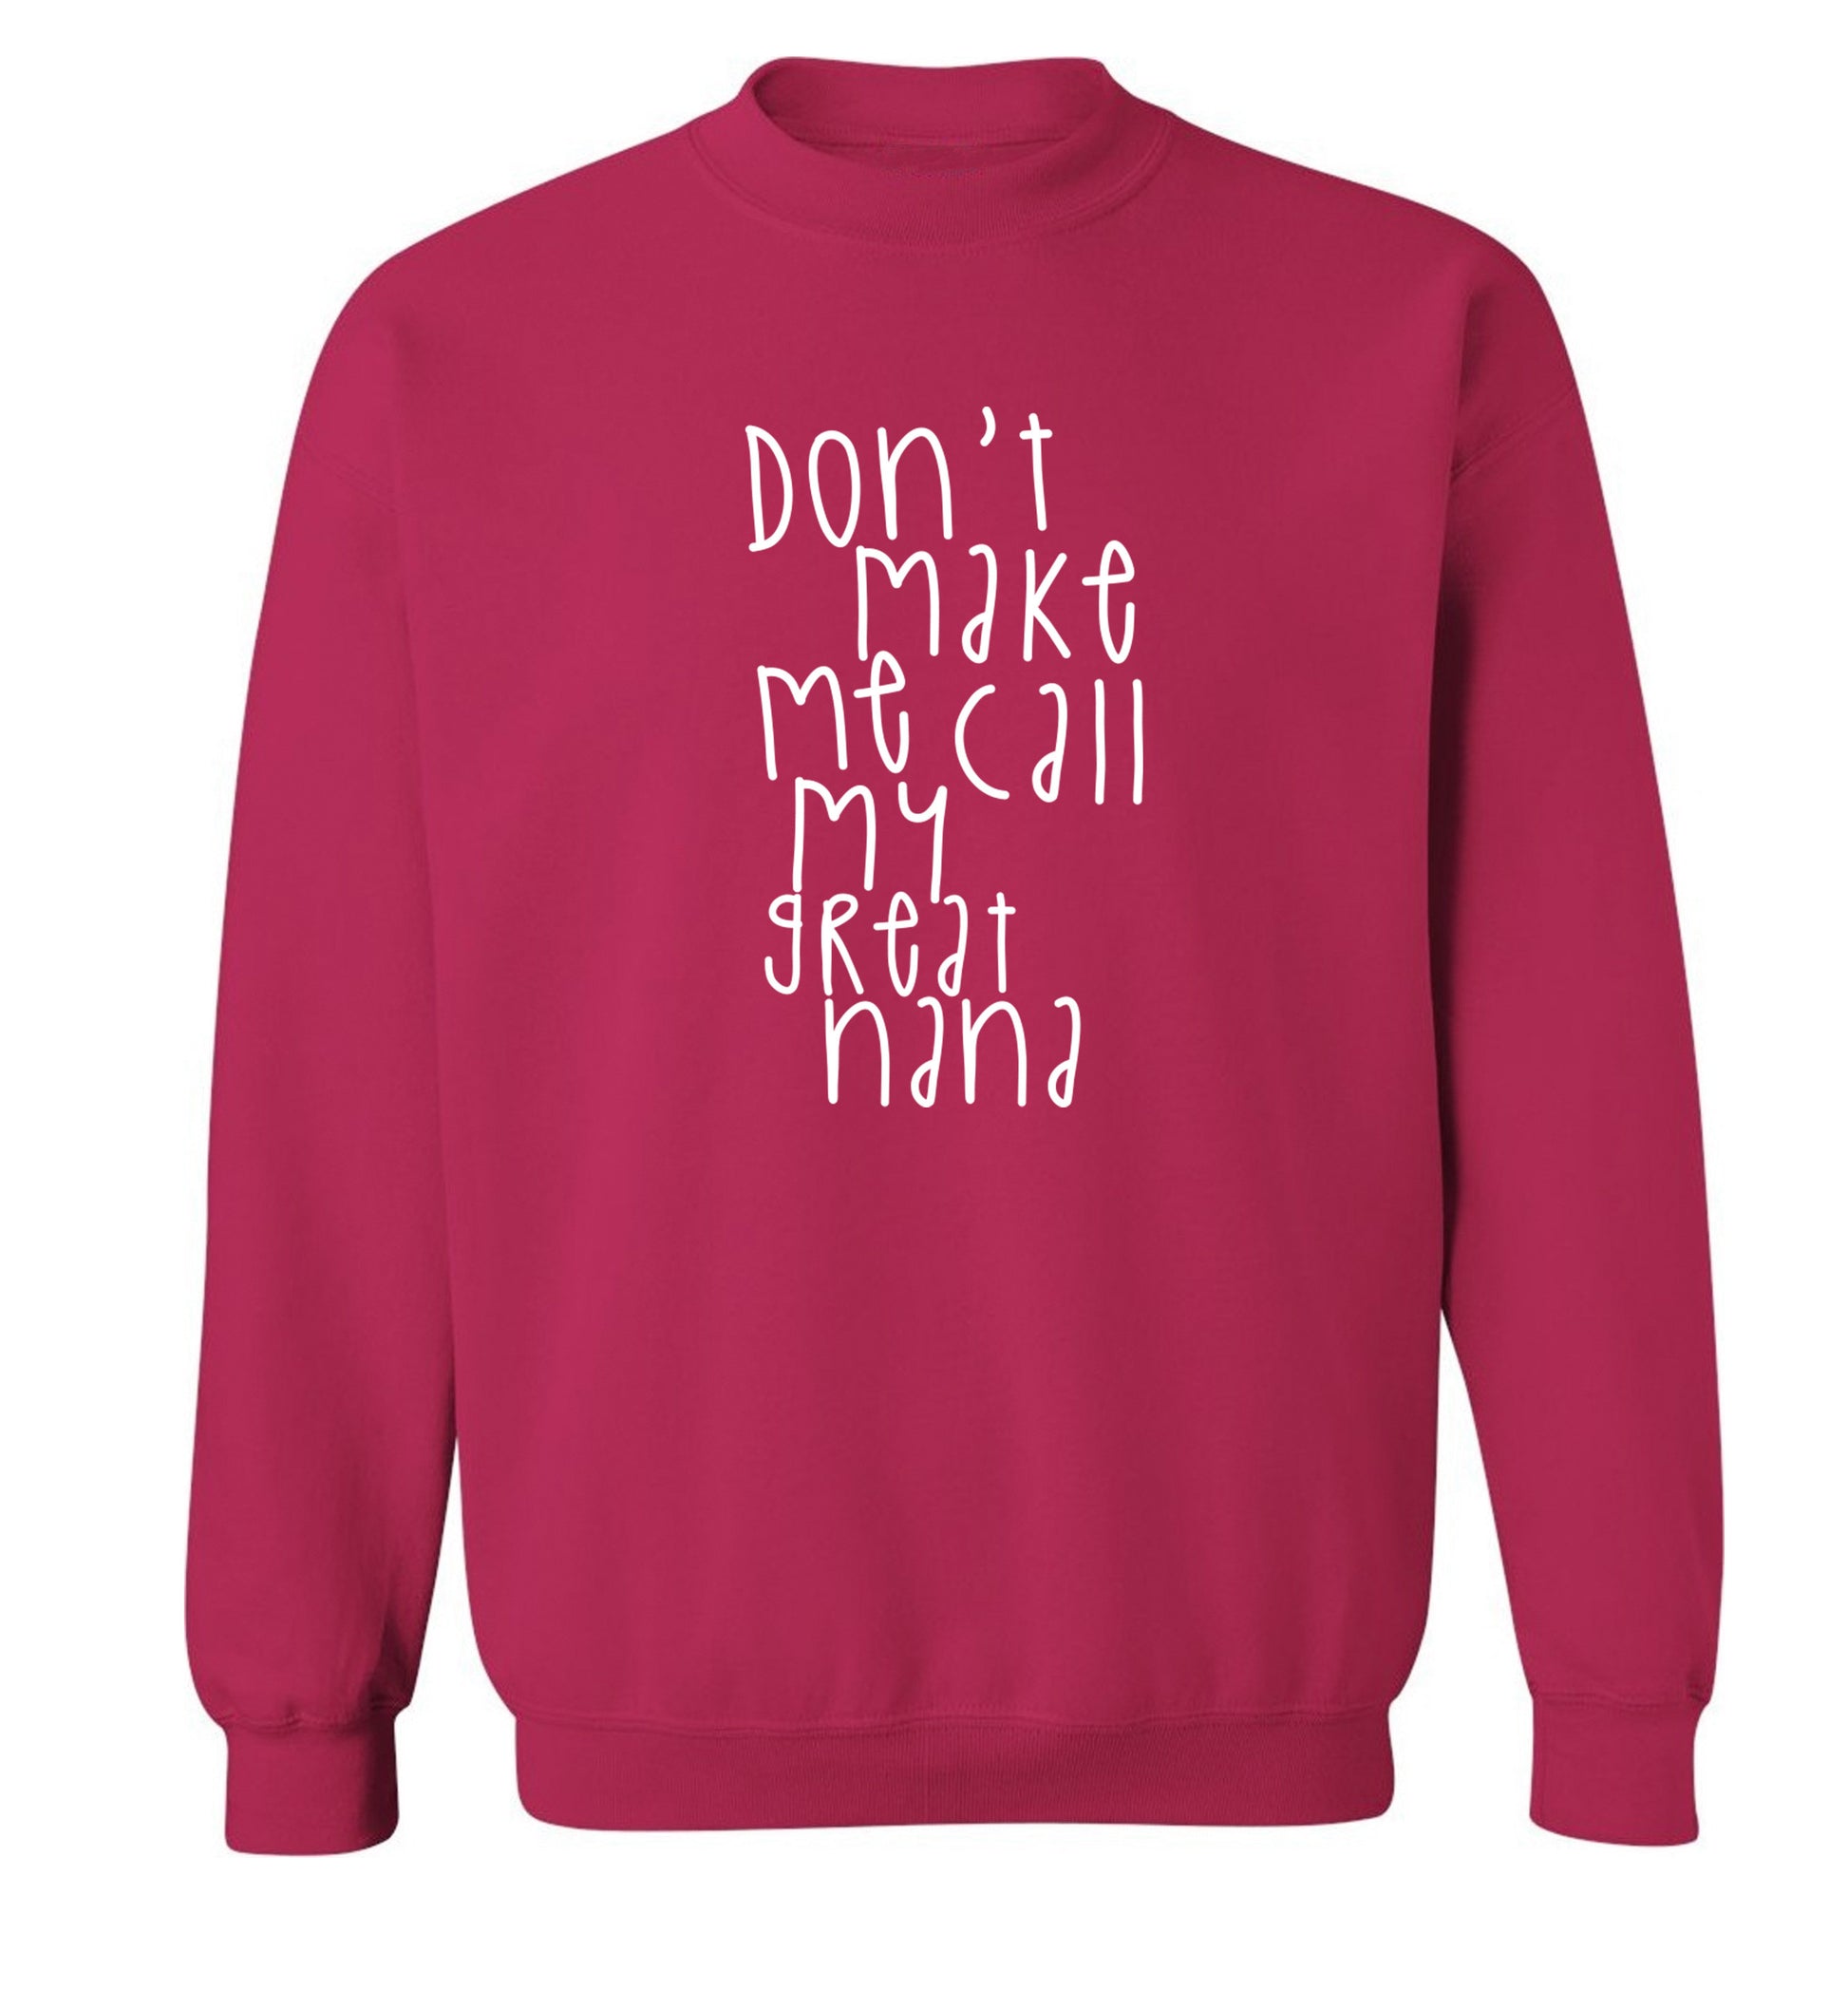 Don't make me call my great nana Adult's unisex pink Sweater 2XL